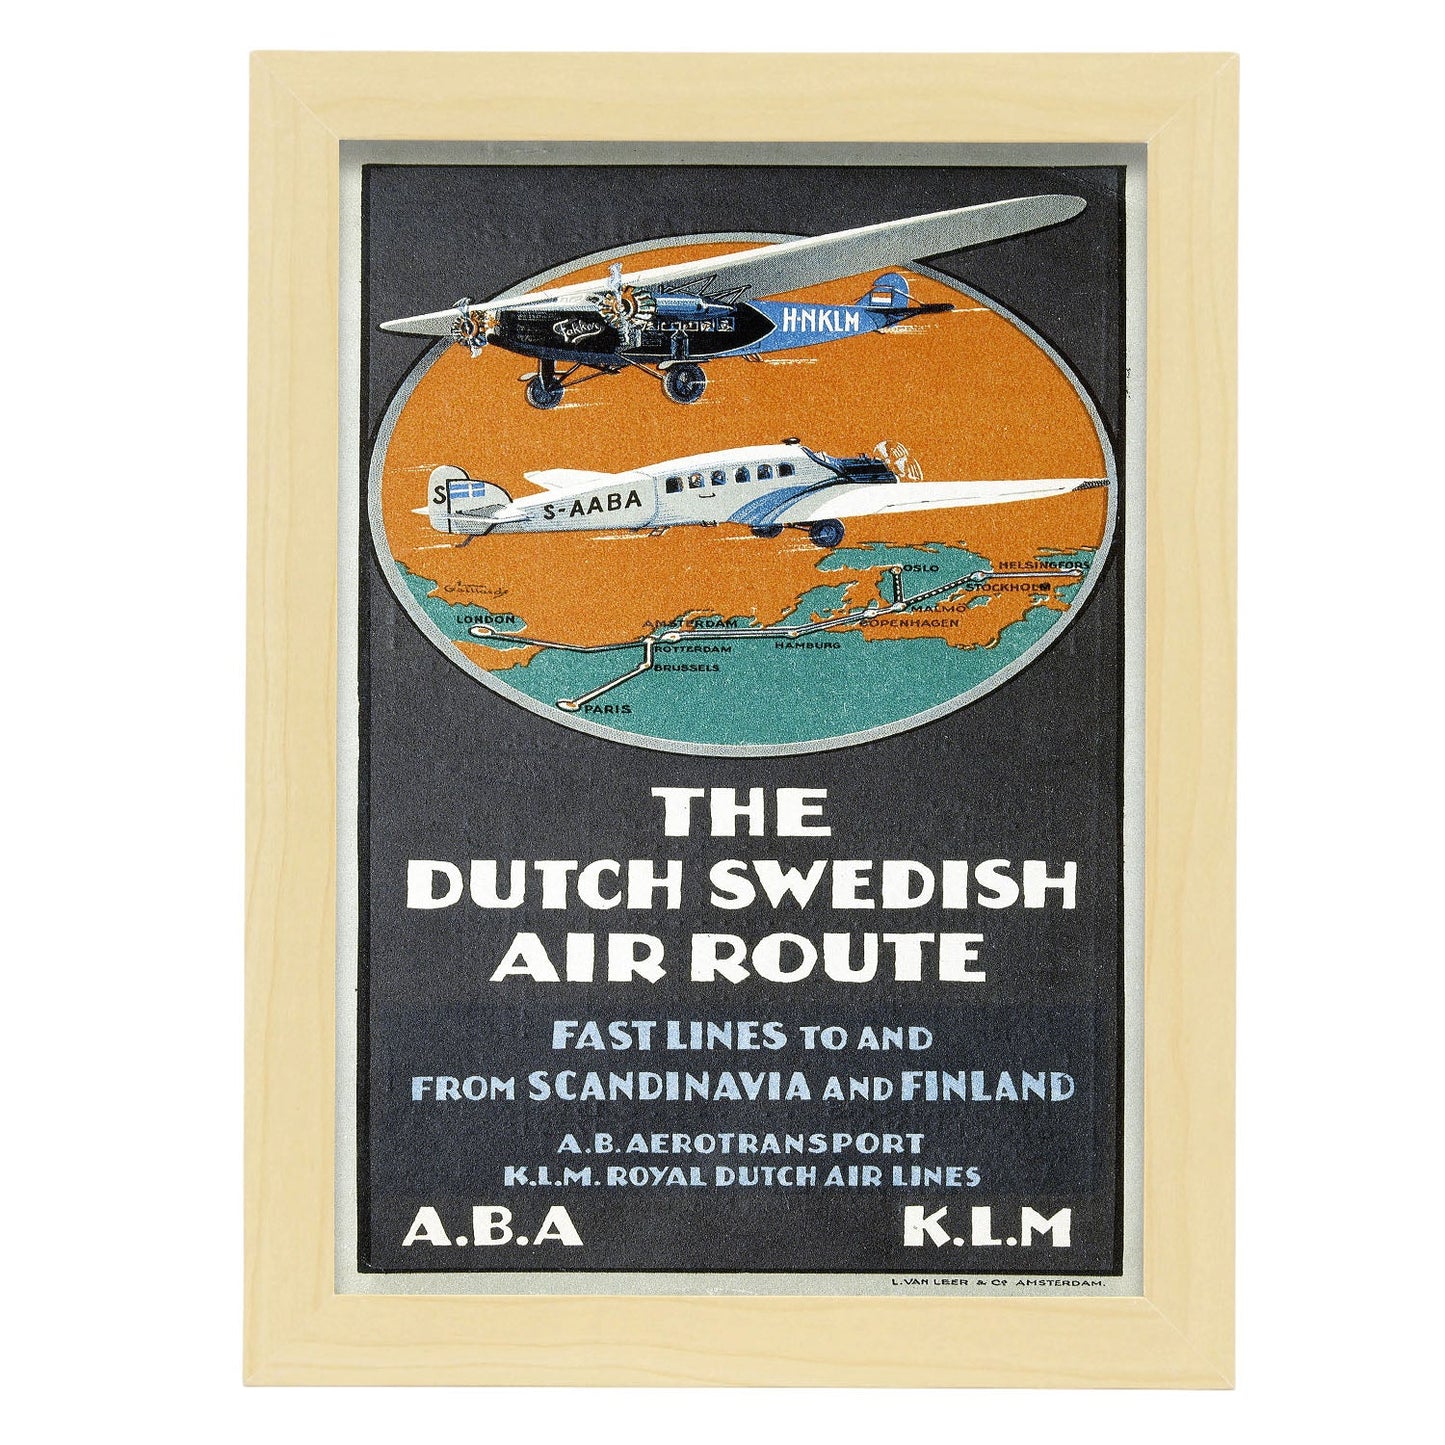 ABA_Advertisment_leaflet_about_The_Dutch_Swedish_Air_Route_by_ABA_and_KLM-Artwork-Nacnic-A4-Marco Madera clara-Nacnic Estudio SL